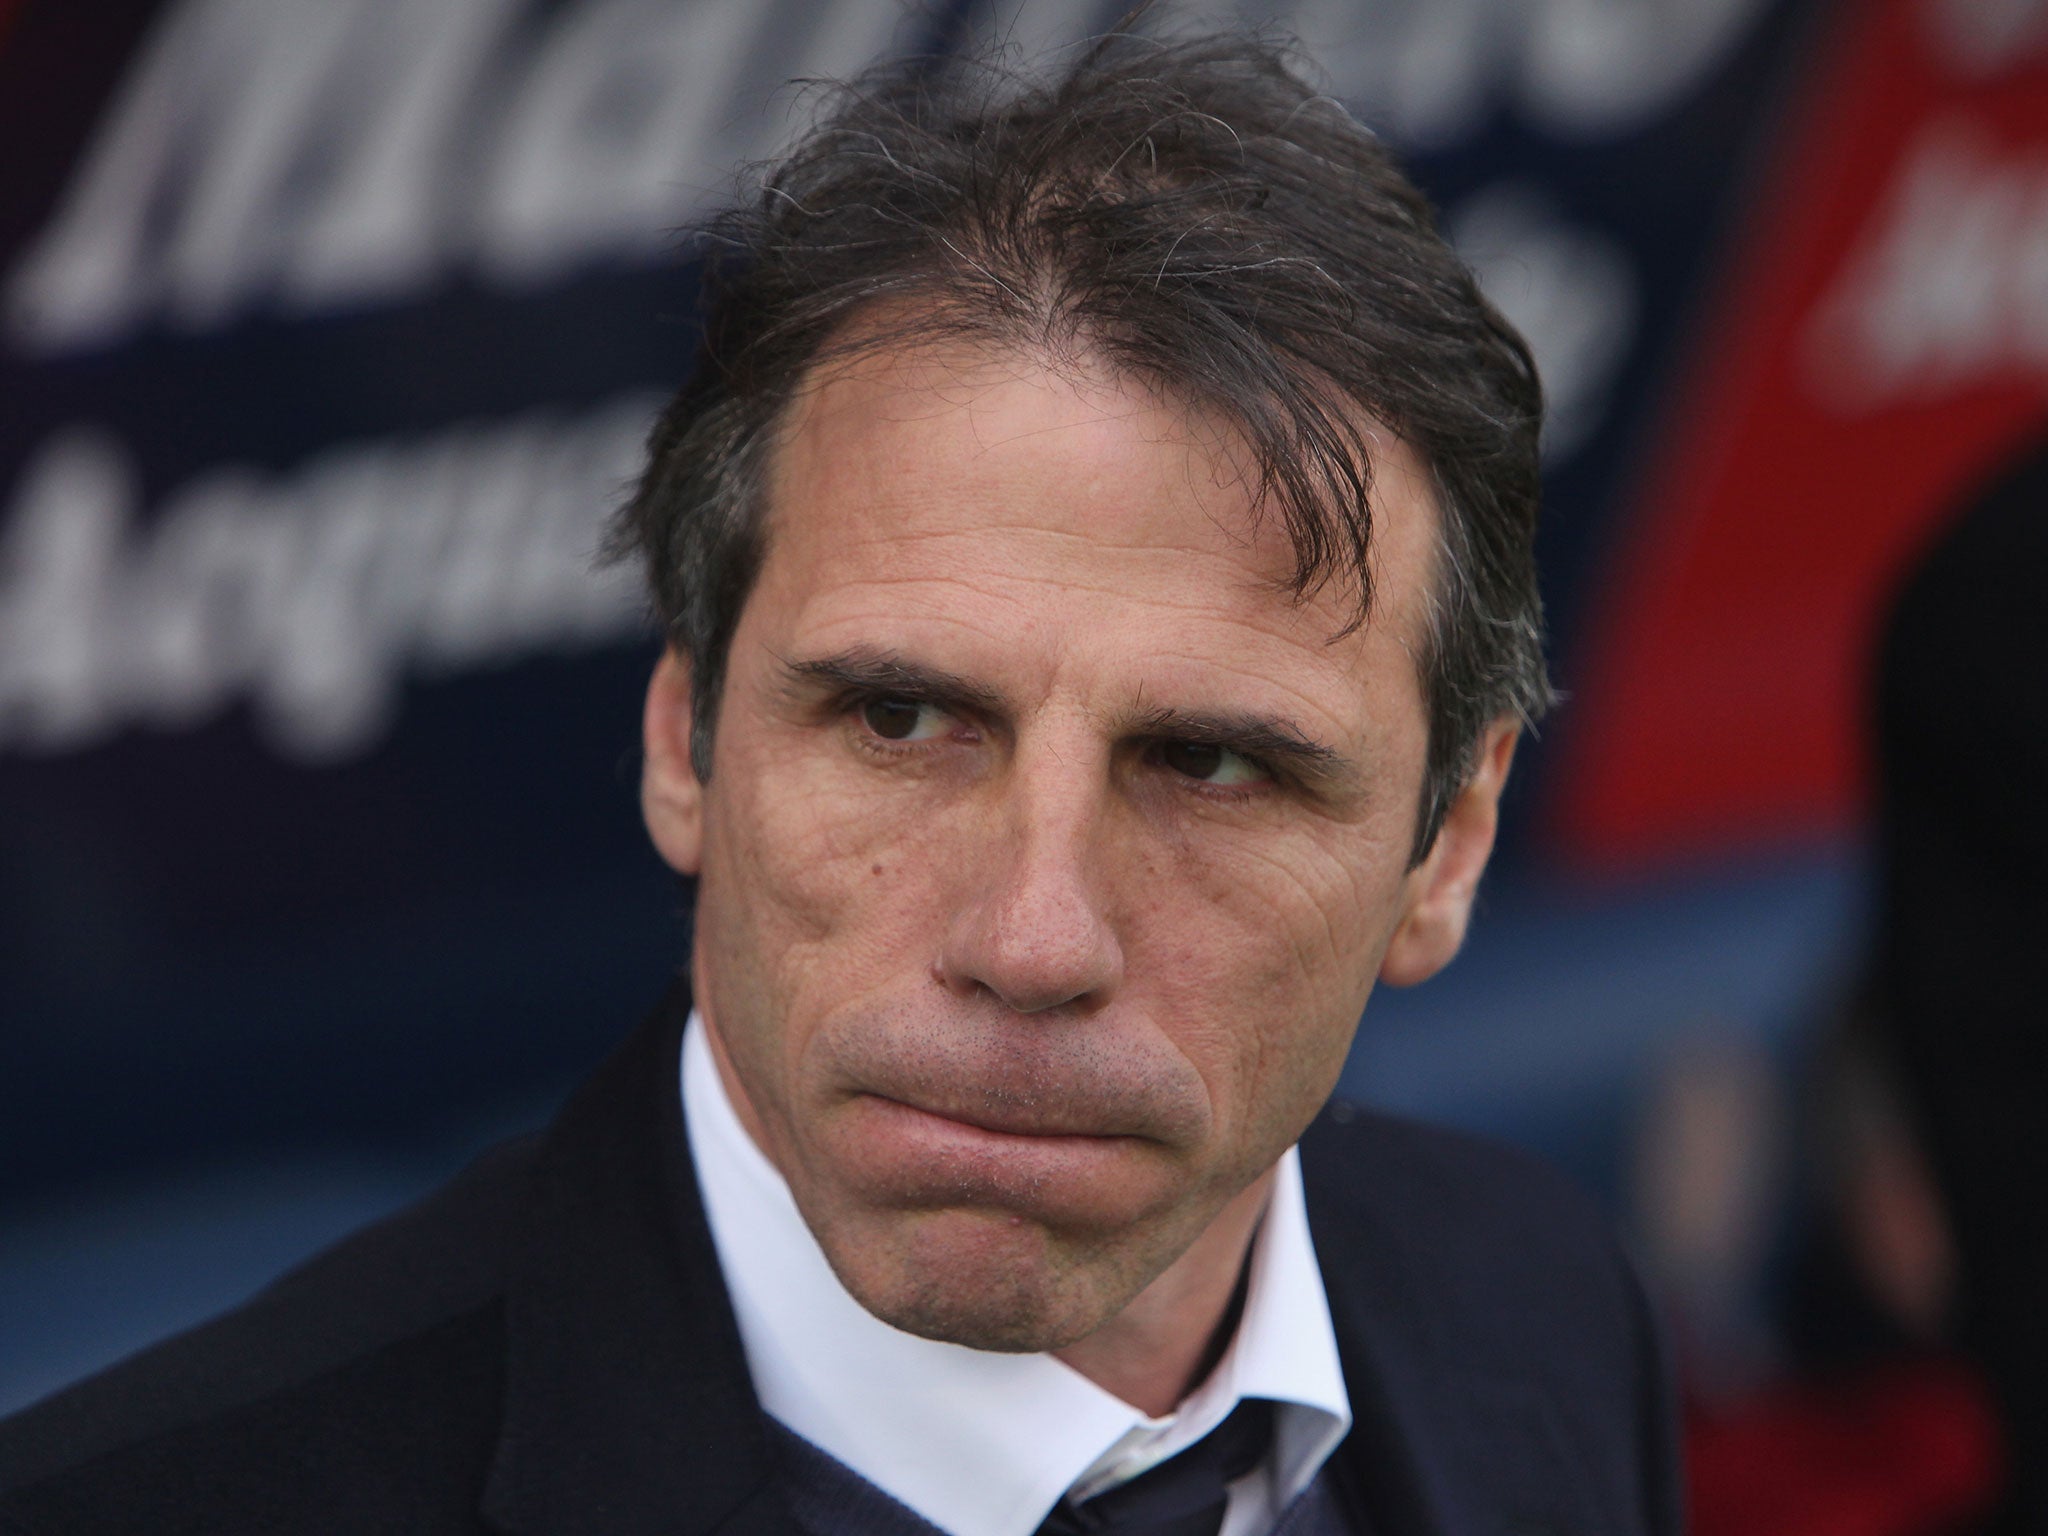 Birmingham City confirmed Zola would be replacing Rowett on Wednesday evening